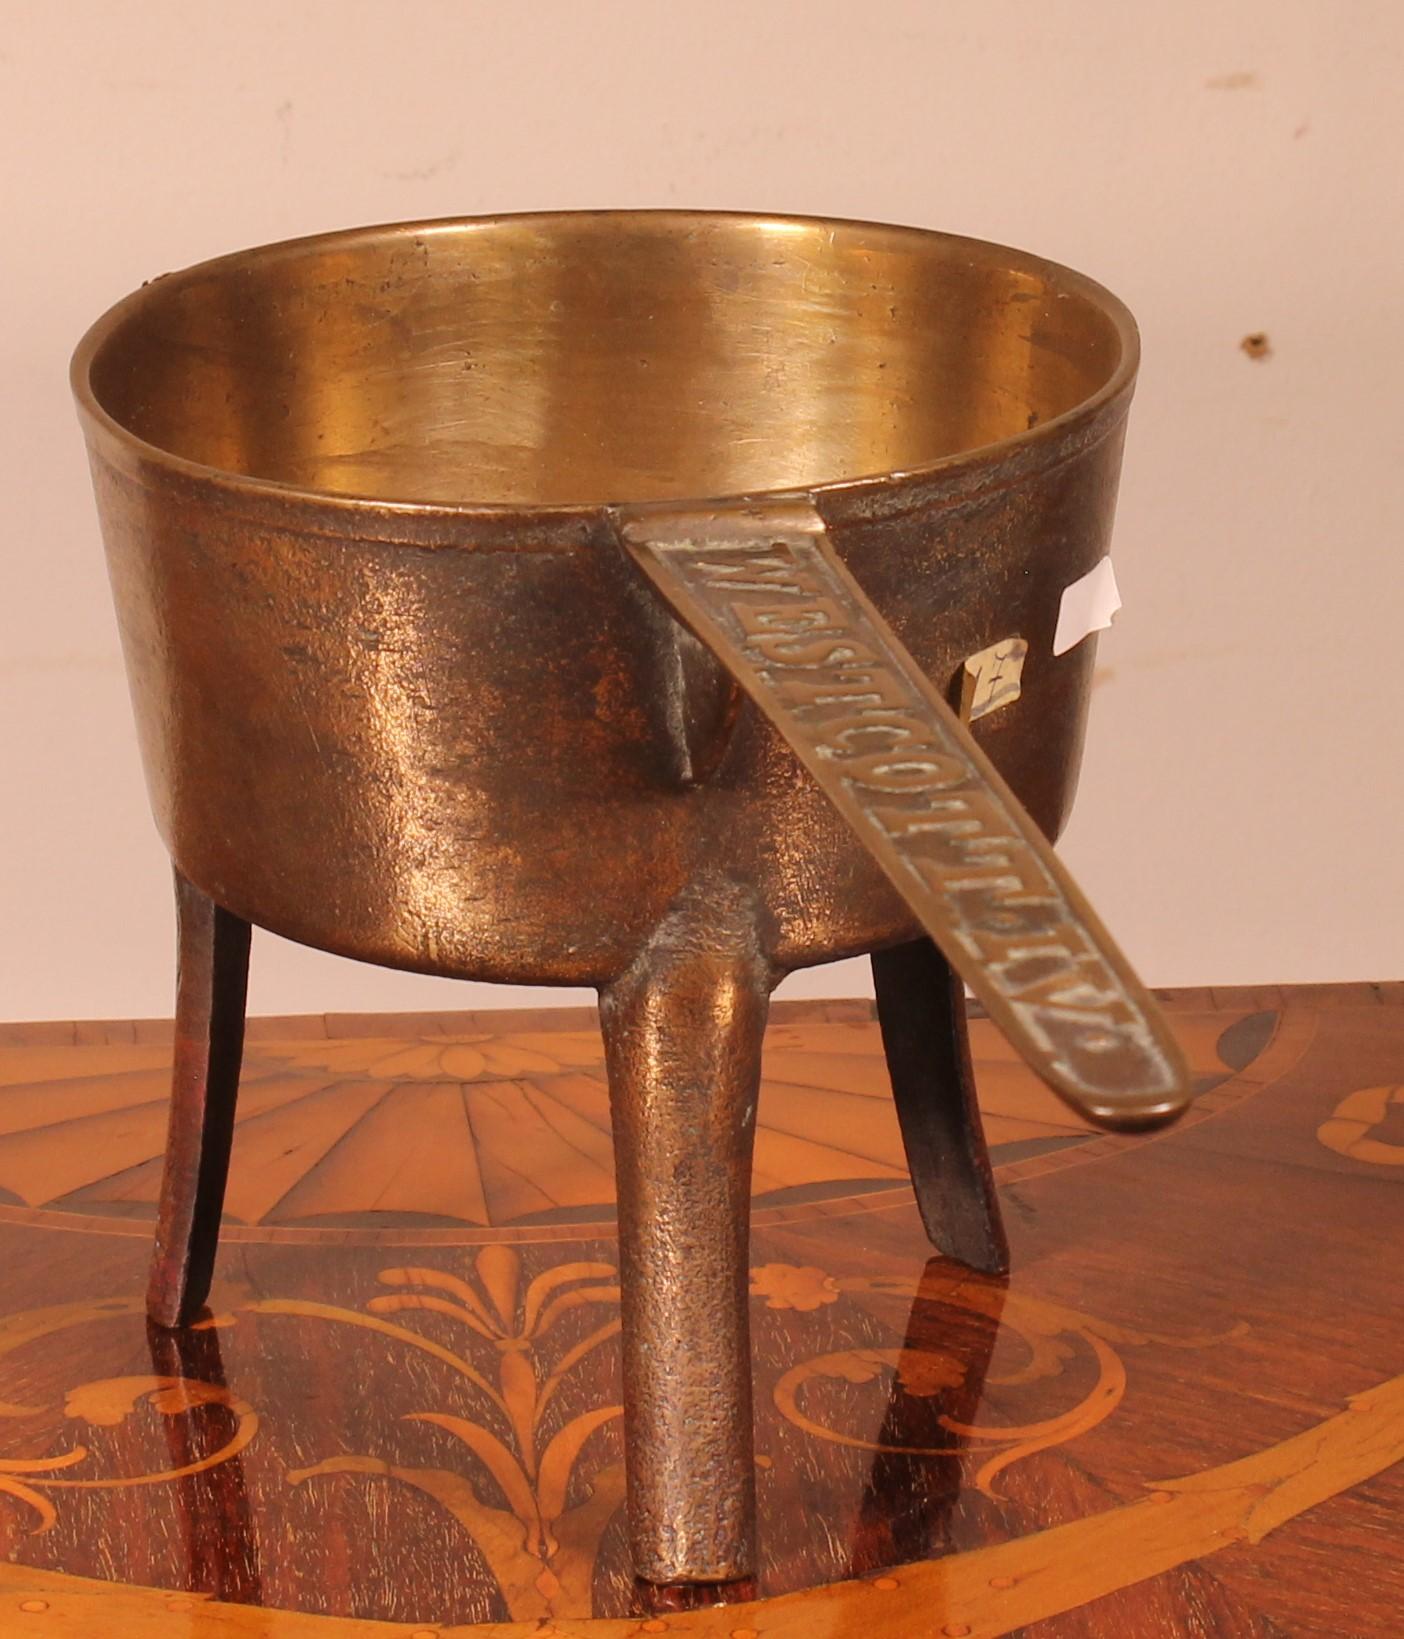 British 18th Century Tripod Apothecary Skillet from the Westcott Family